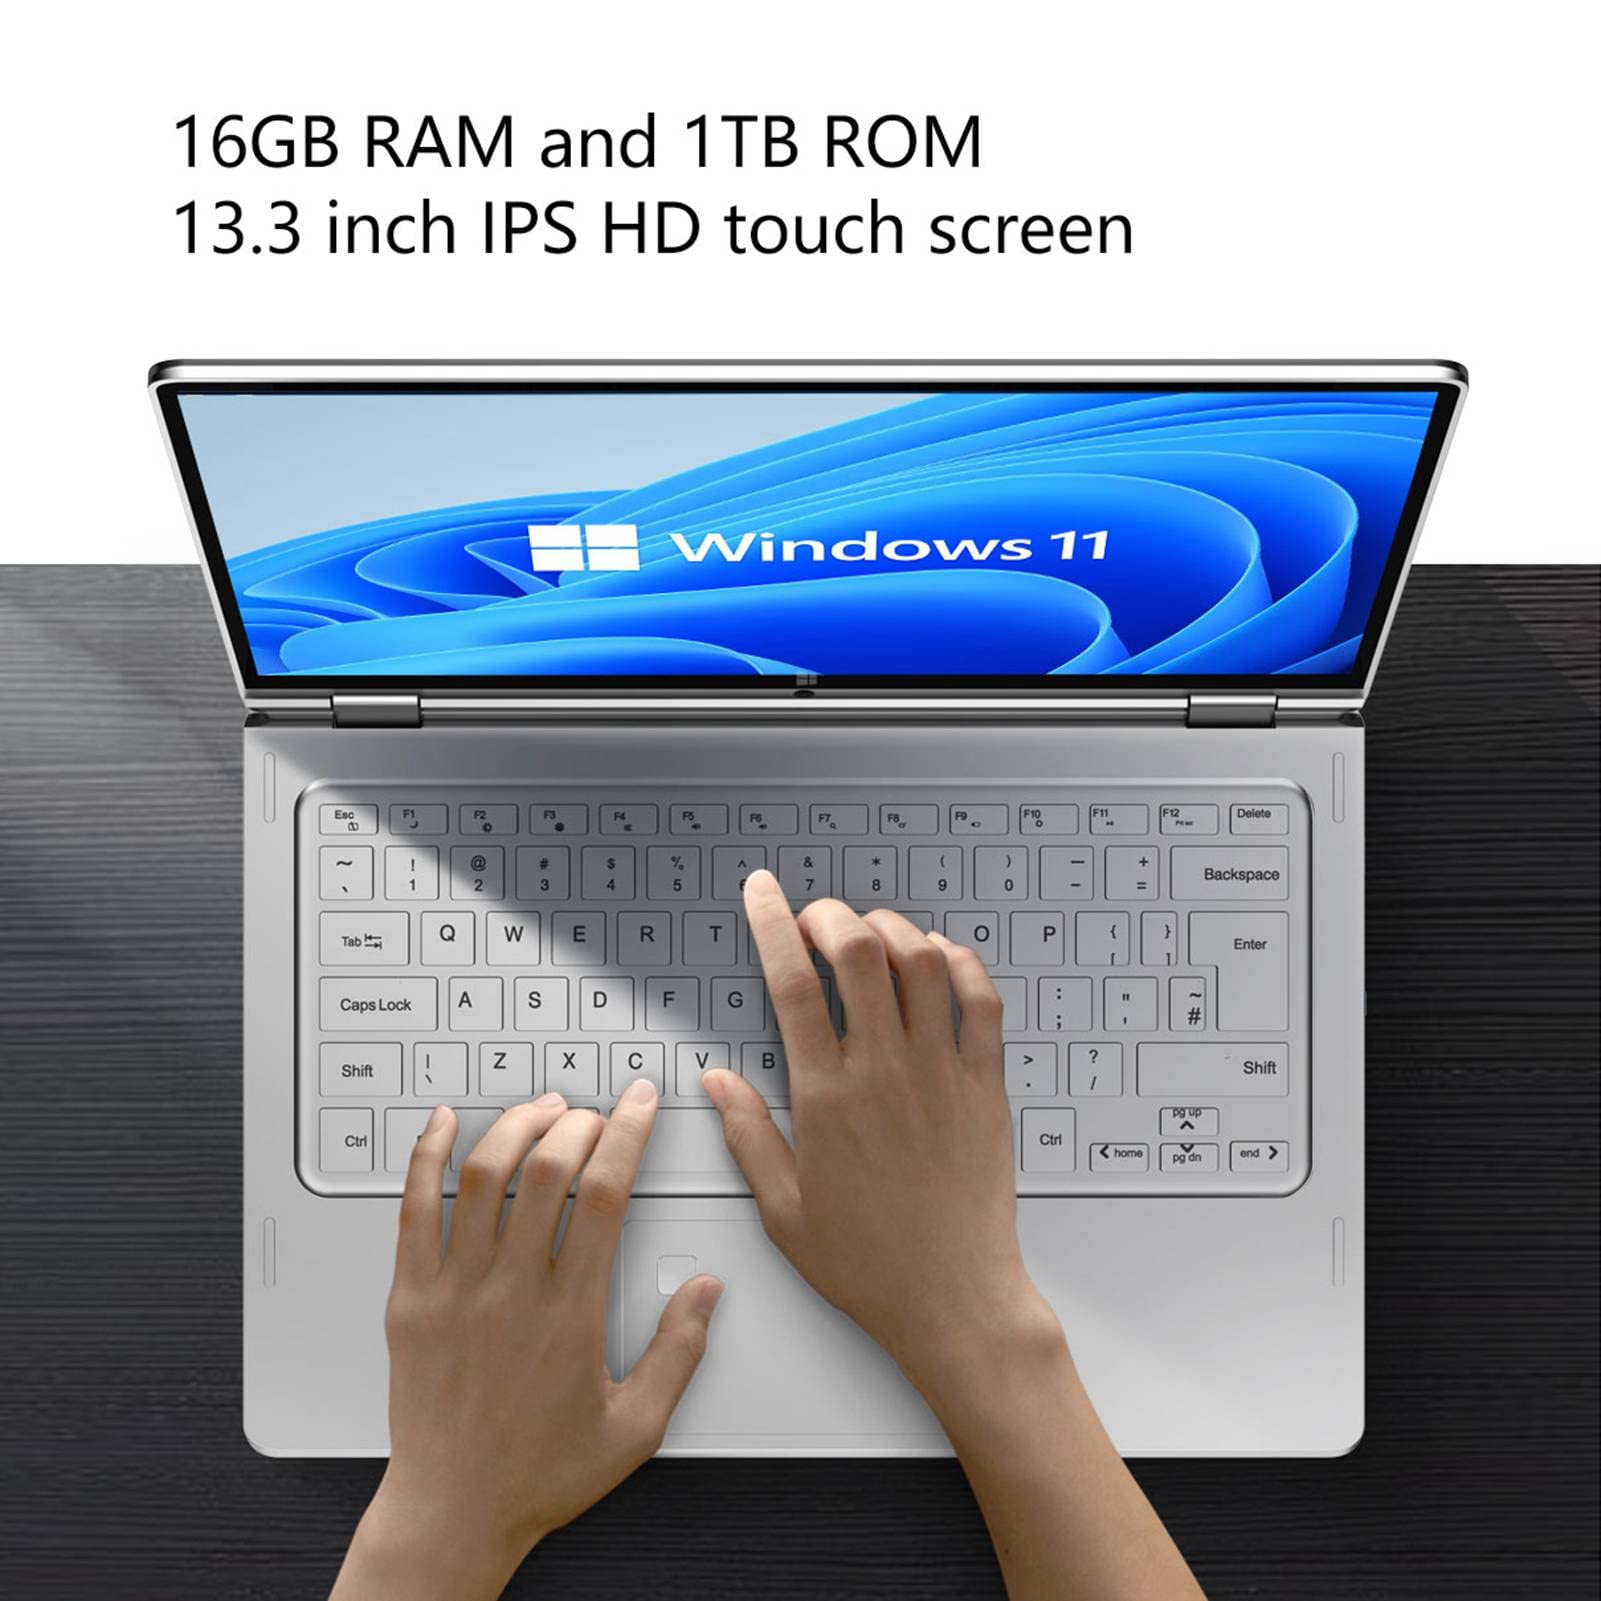 Dpofirs Laptop 13.3 in, 16GB 512GB SSD Windows11 Laptop, for Intel J4105 1.50Ghz (up to 2.50Ghz), for Intel UHD Graphics 600, Mini HDMIx1, WiFi, USB3.0, BT